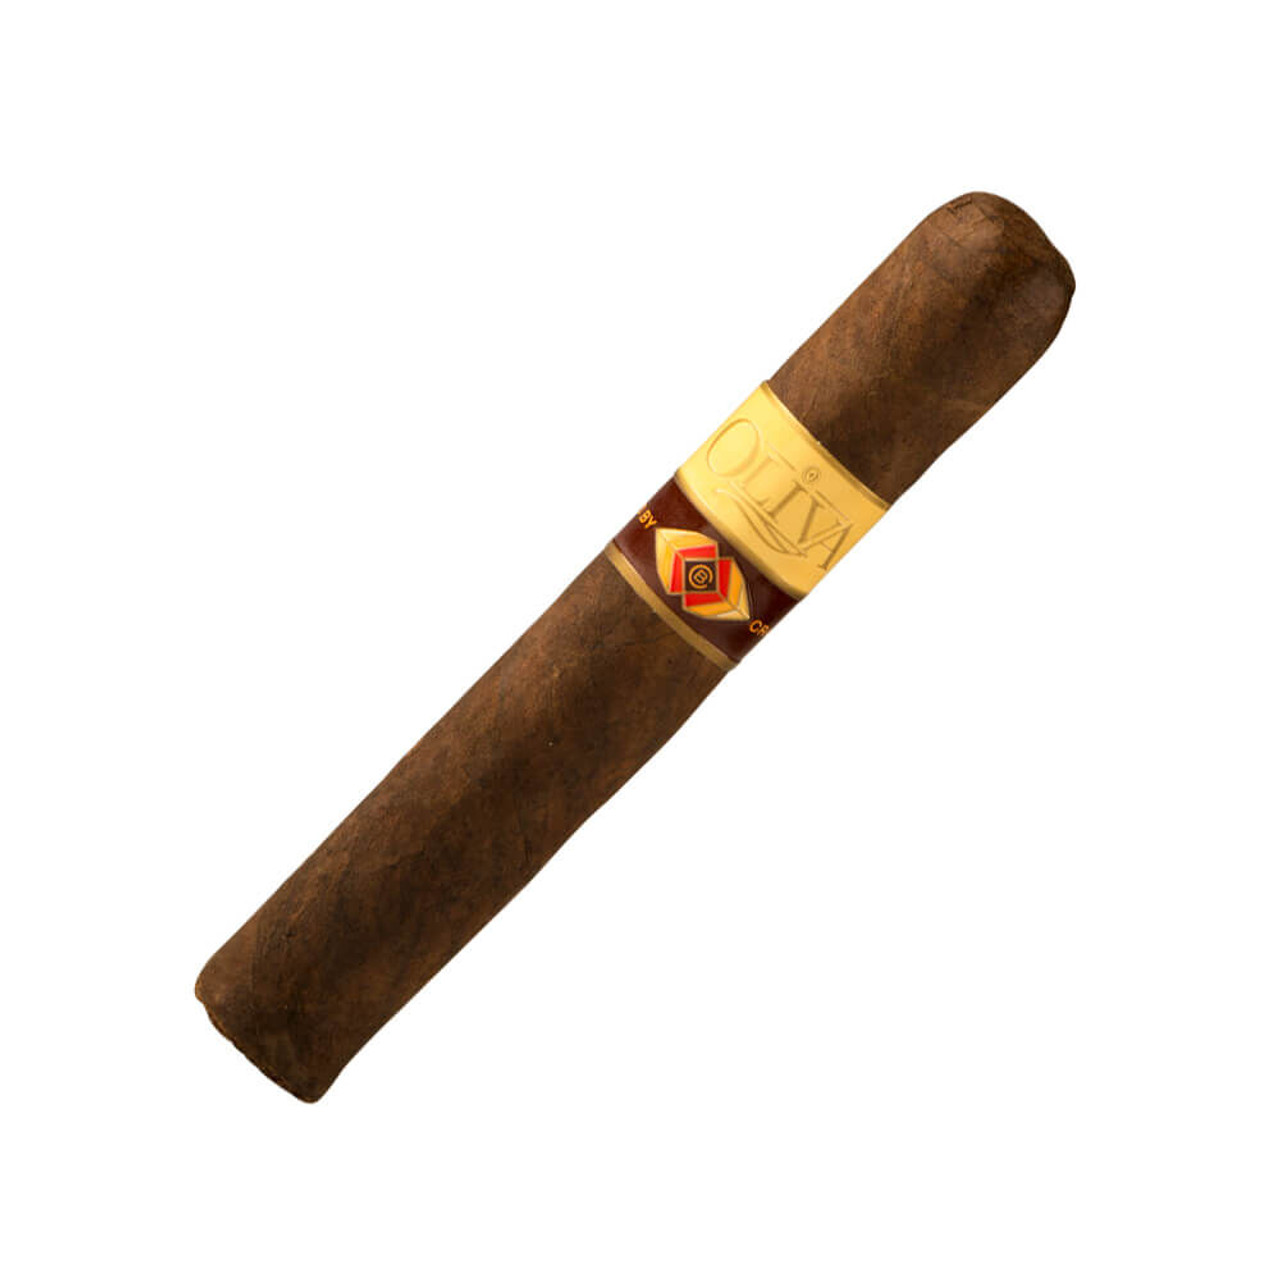 Crafted by Oliva Maduro Robusto Cigars - 5 x 50 (Box of 20)